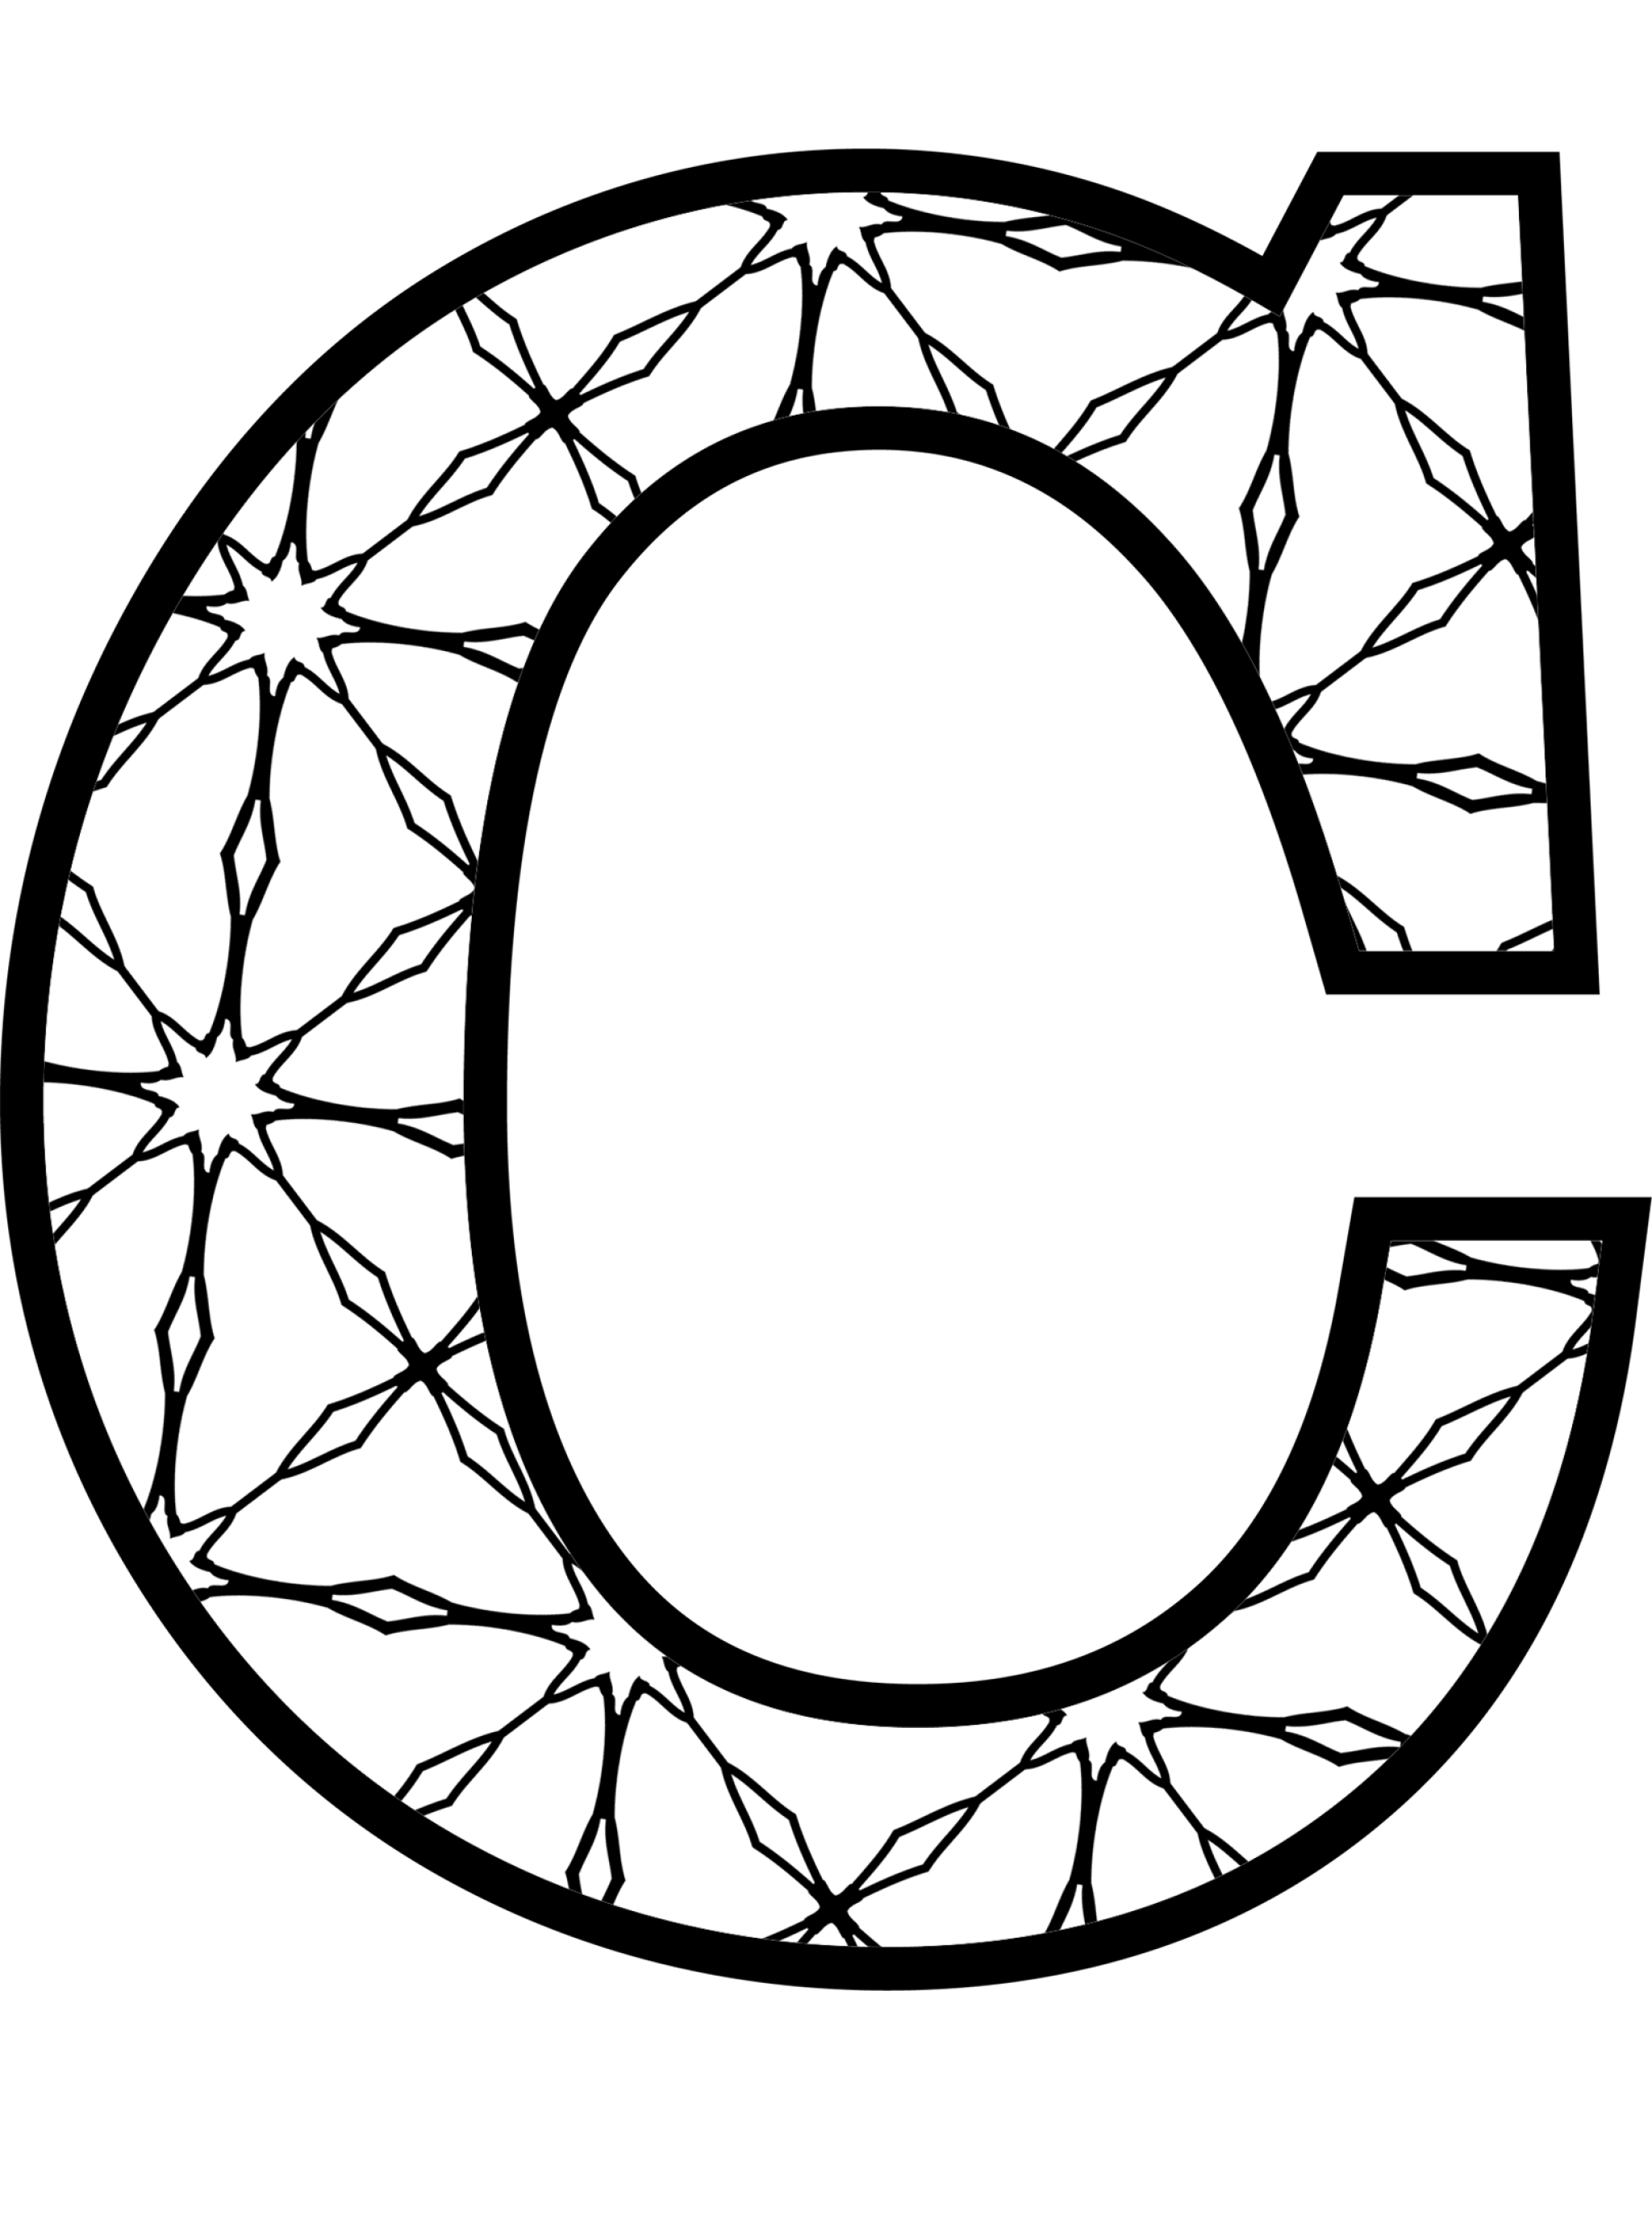 adult coloring pages letter c